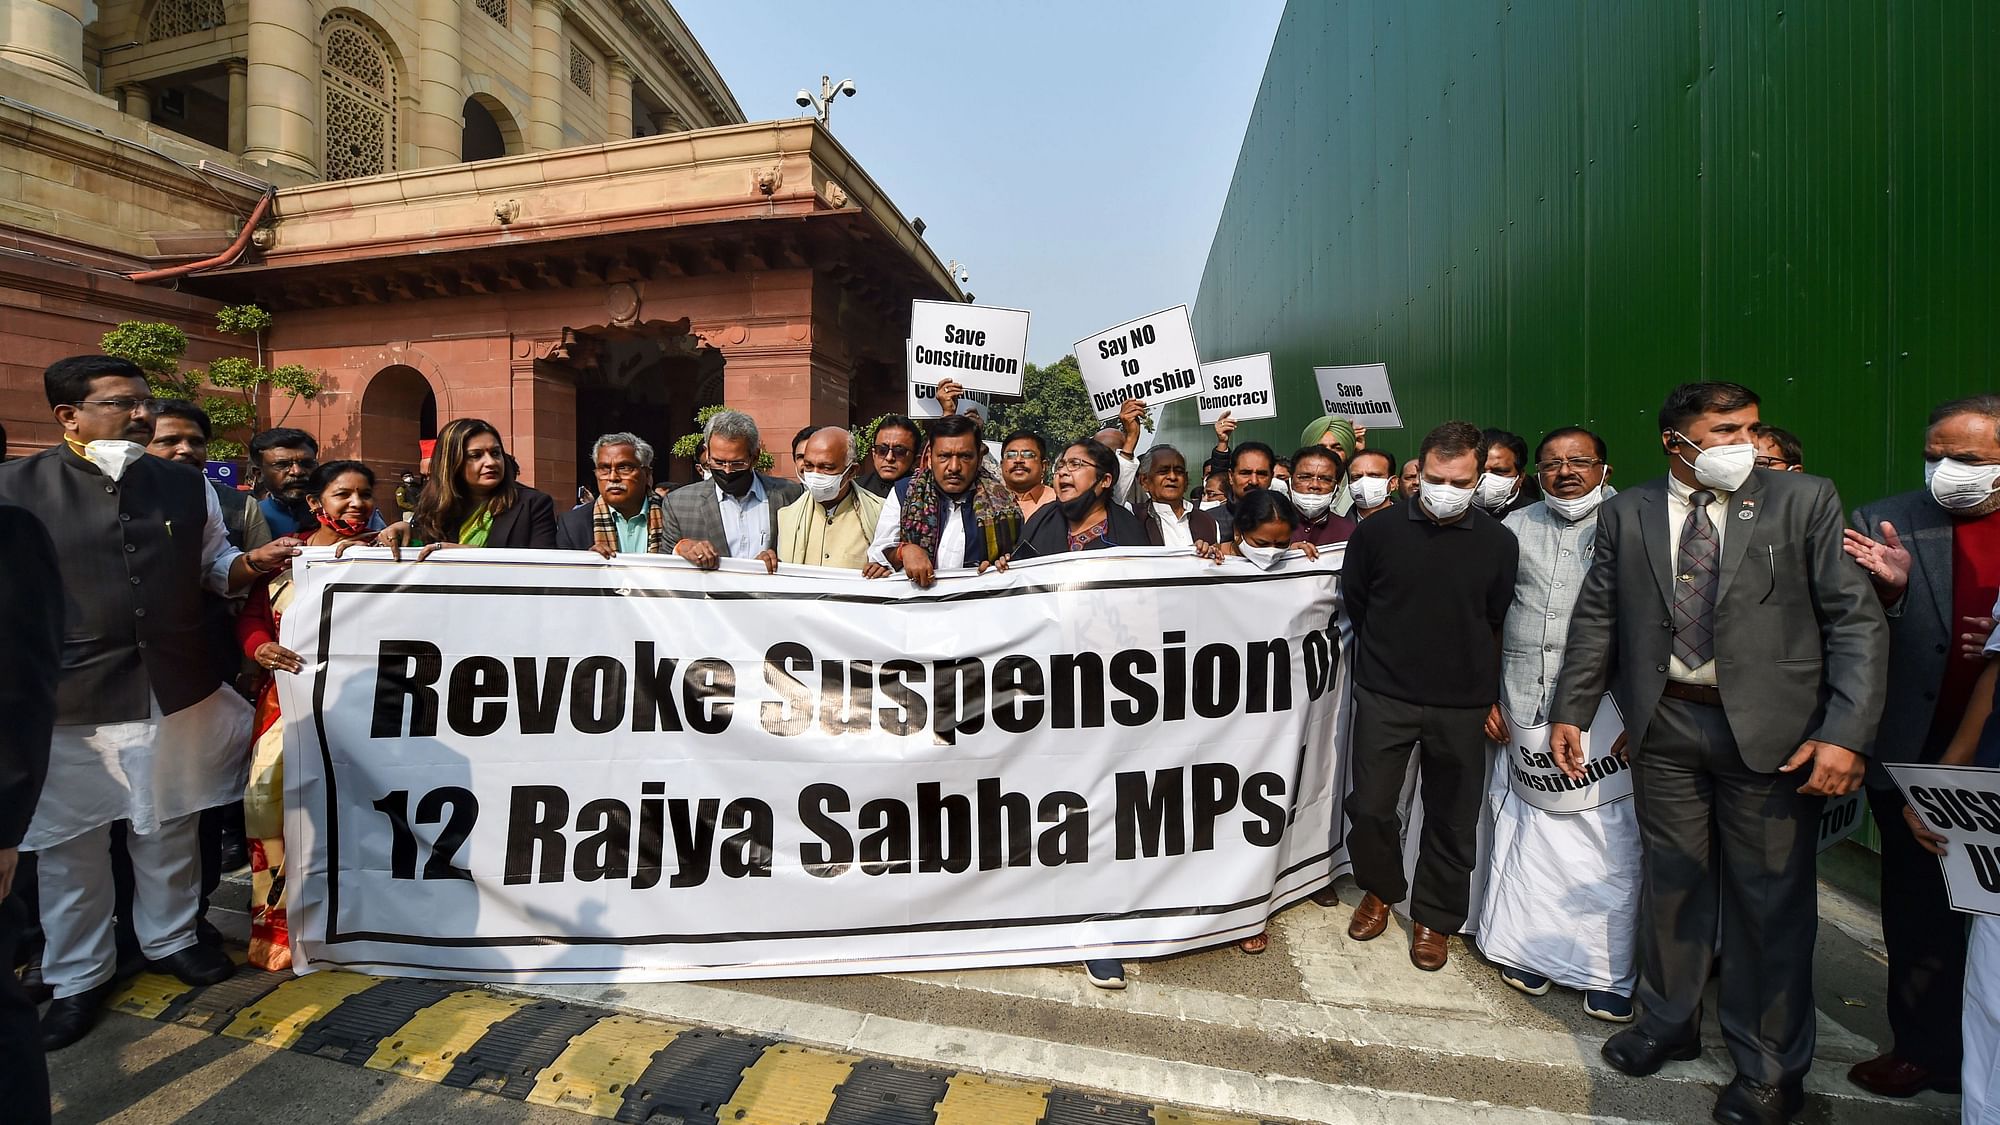 <div class="paragraphs"><p>Parliament members belonging to various Opposition parties on Tuesday, 14 December, marched from the Gandhi statue in the Parliament premises to Vijay Chowk, in order to mark their <a href="https://www.thequint.com/news/india/undemocratic-or-unruly-the-suspension-of-12-mps-stalemate-in-the-parliament">protest against the suspension of 12 MPs</a> from the proceedings of the Rajya Sabha.</p></div>